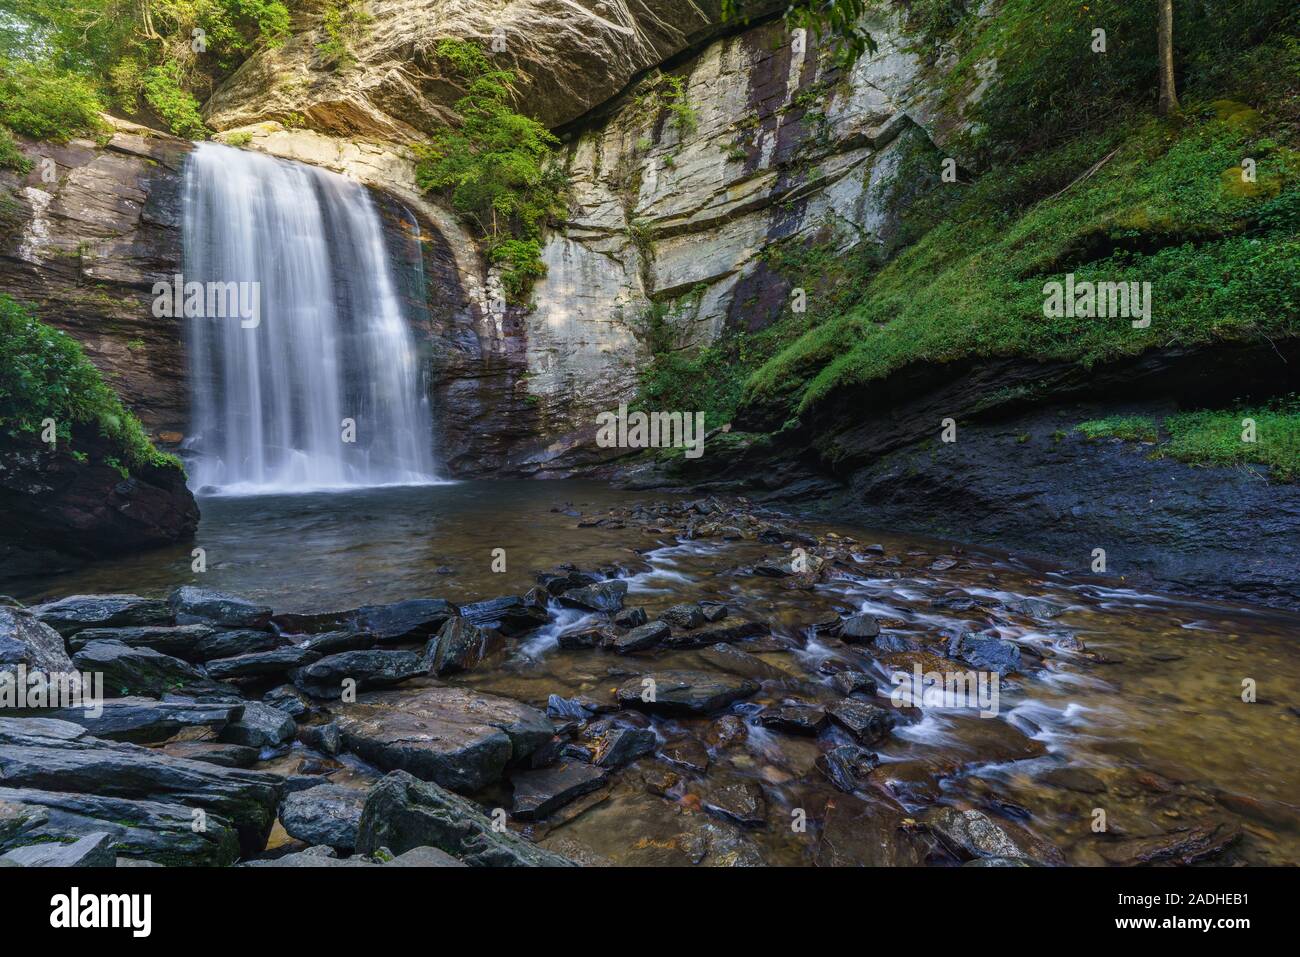 Looking Glass Falls in Pisgah National Forest, near Asheville, North Carolina Stock Photo